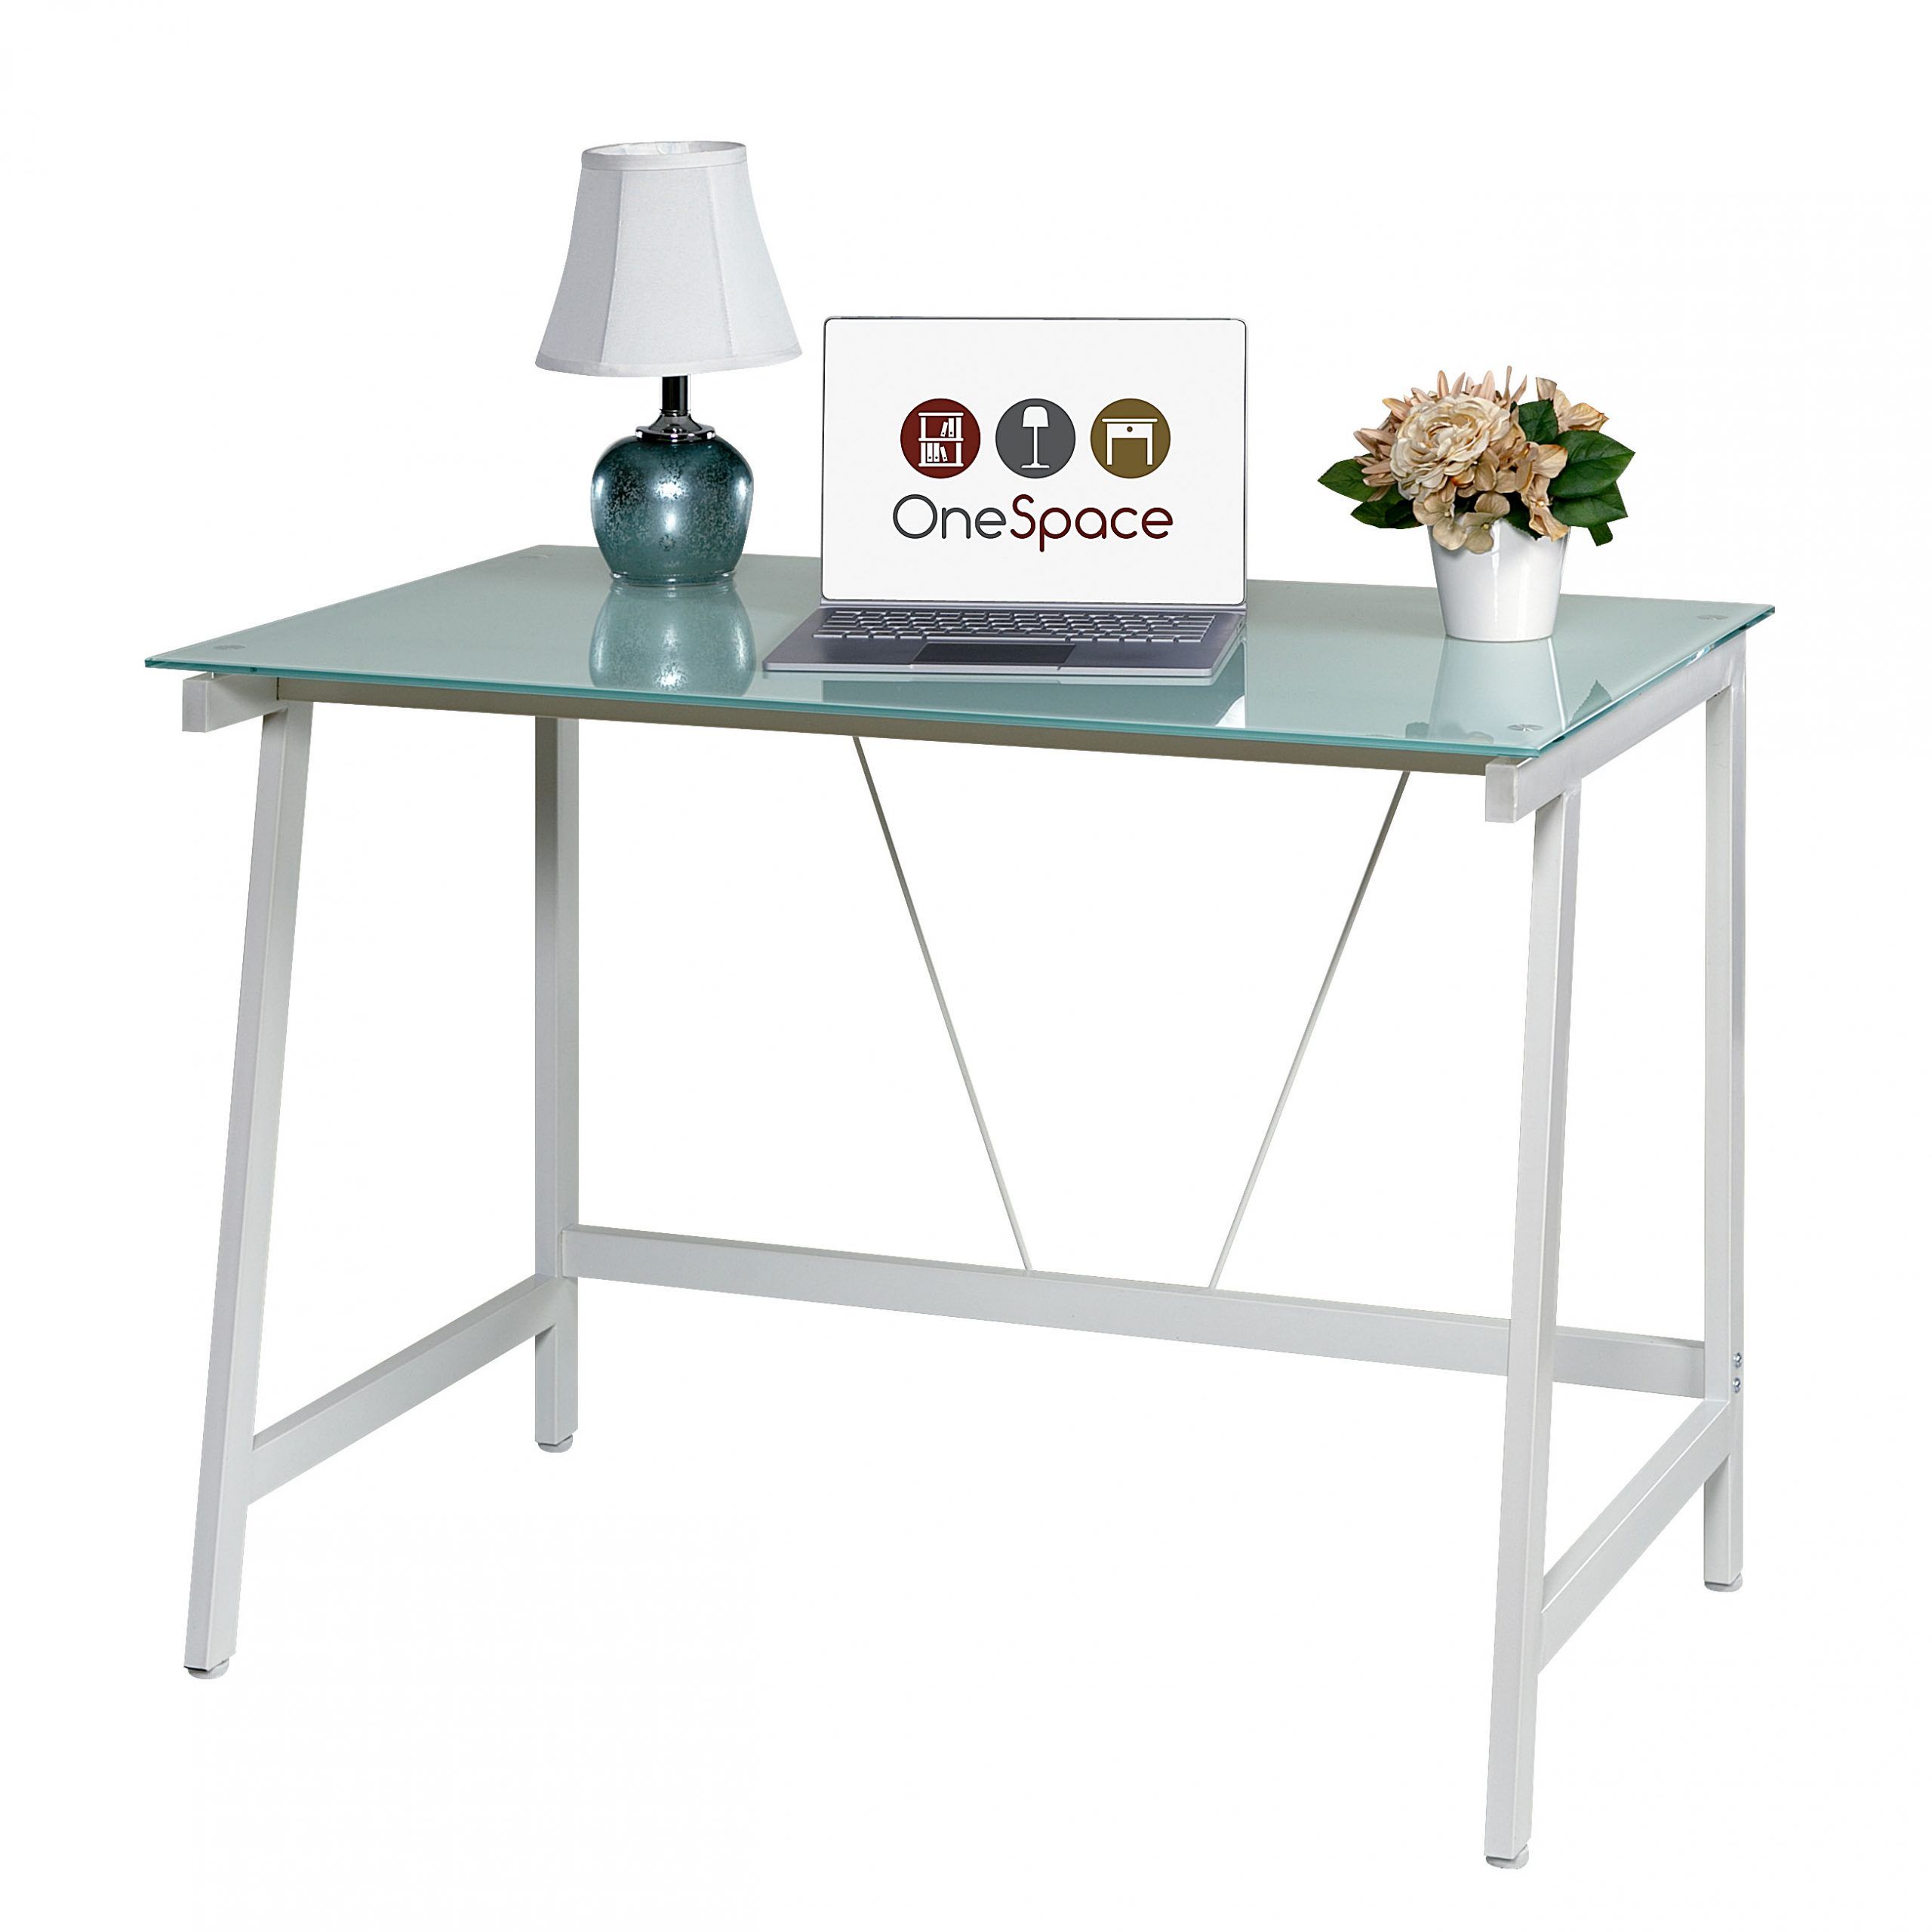 Onespace 50 Hd0107 Contemporary Glass Writing Desk, Steel Frame, White Inside Glass And Walnut Modern Writing Desks (View 12 of 15)